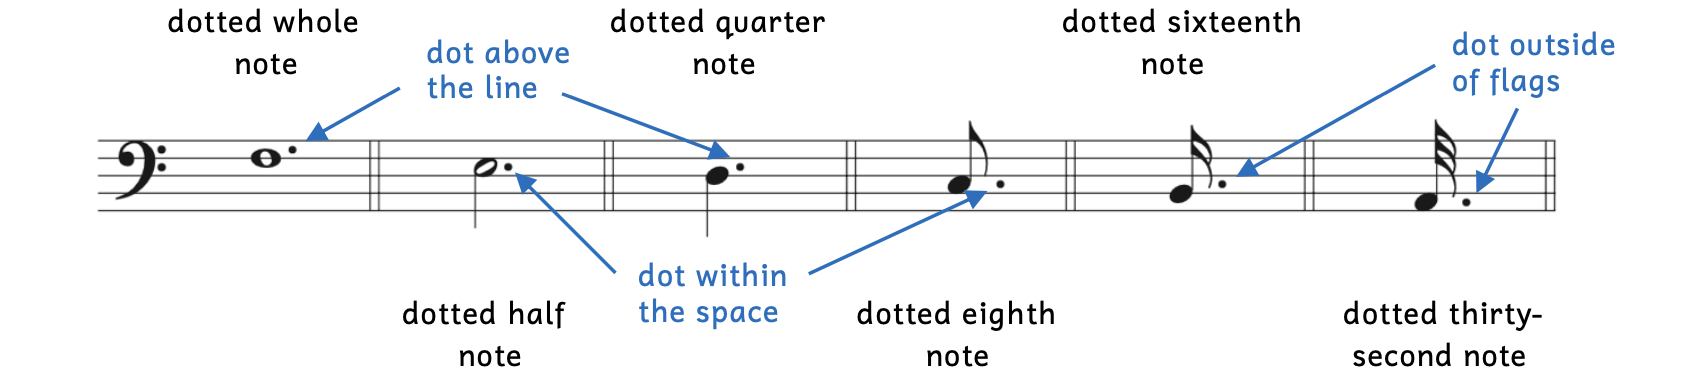 Different types of dotted notes are shown in bass clef and how to write them on the staff. The dotted whole note is on the F on the fourth line. Its dot is written above the line. The dotted half note is on the E in the third space. Its dot is written directly next to the notehead in the same space. The dotted quarter note is on the third line. Its dot is written above the line. The dotted eighth note is written in the second space. Its dot is written in the same space, but is farther away from the notehead because of the flag. The dotted sixteenth note is written on the second line. Its dot is in the space above the line but is farther away from the notehead because of the flags. The dotted thirty-second note is written in the first space. Its dots is in the same space but farther away from the notehead because of the flags.